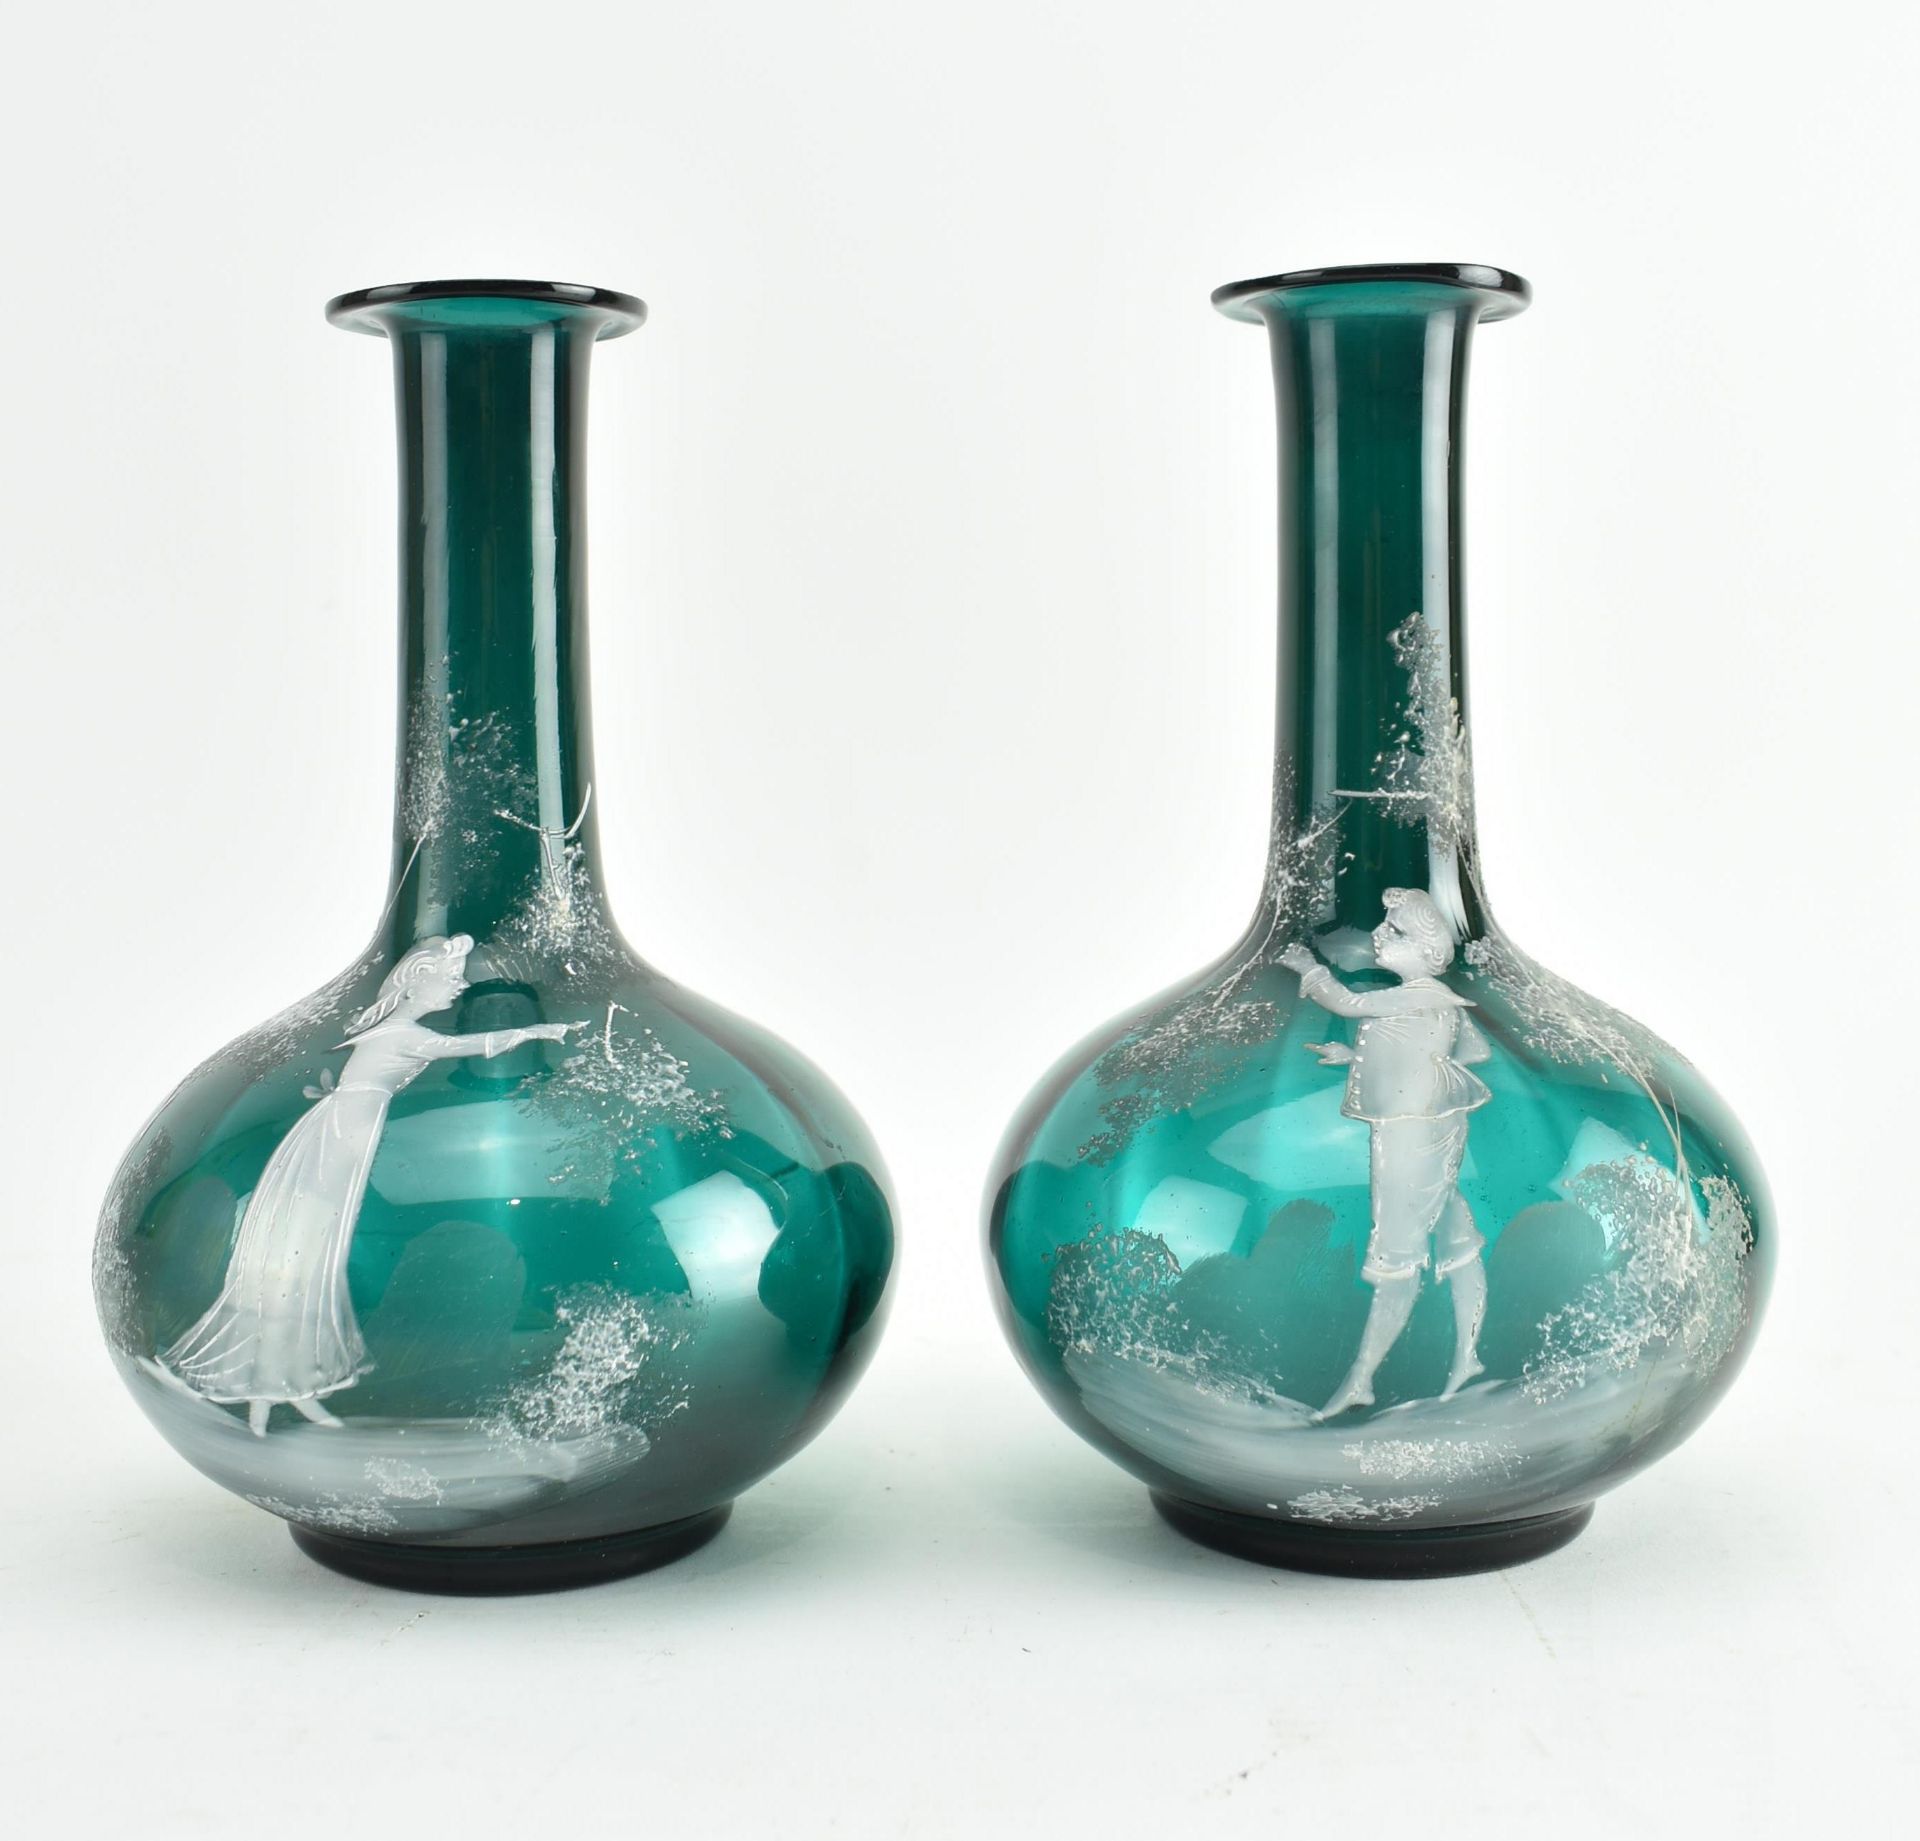 PAIR OF VICTORIAN MARY GREGORY GREEN FLUTED GLASS VASES